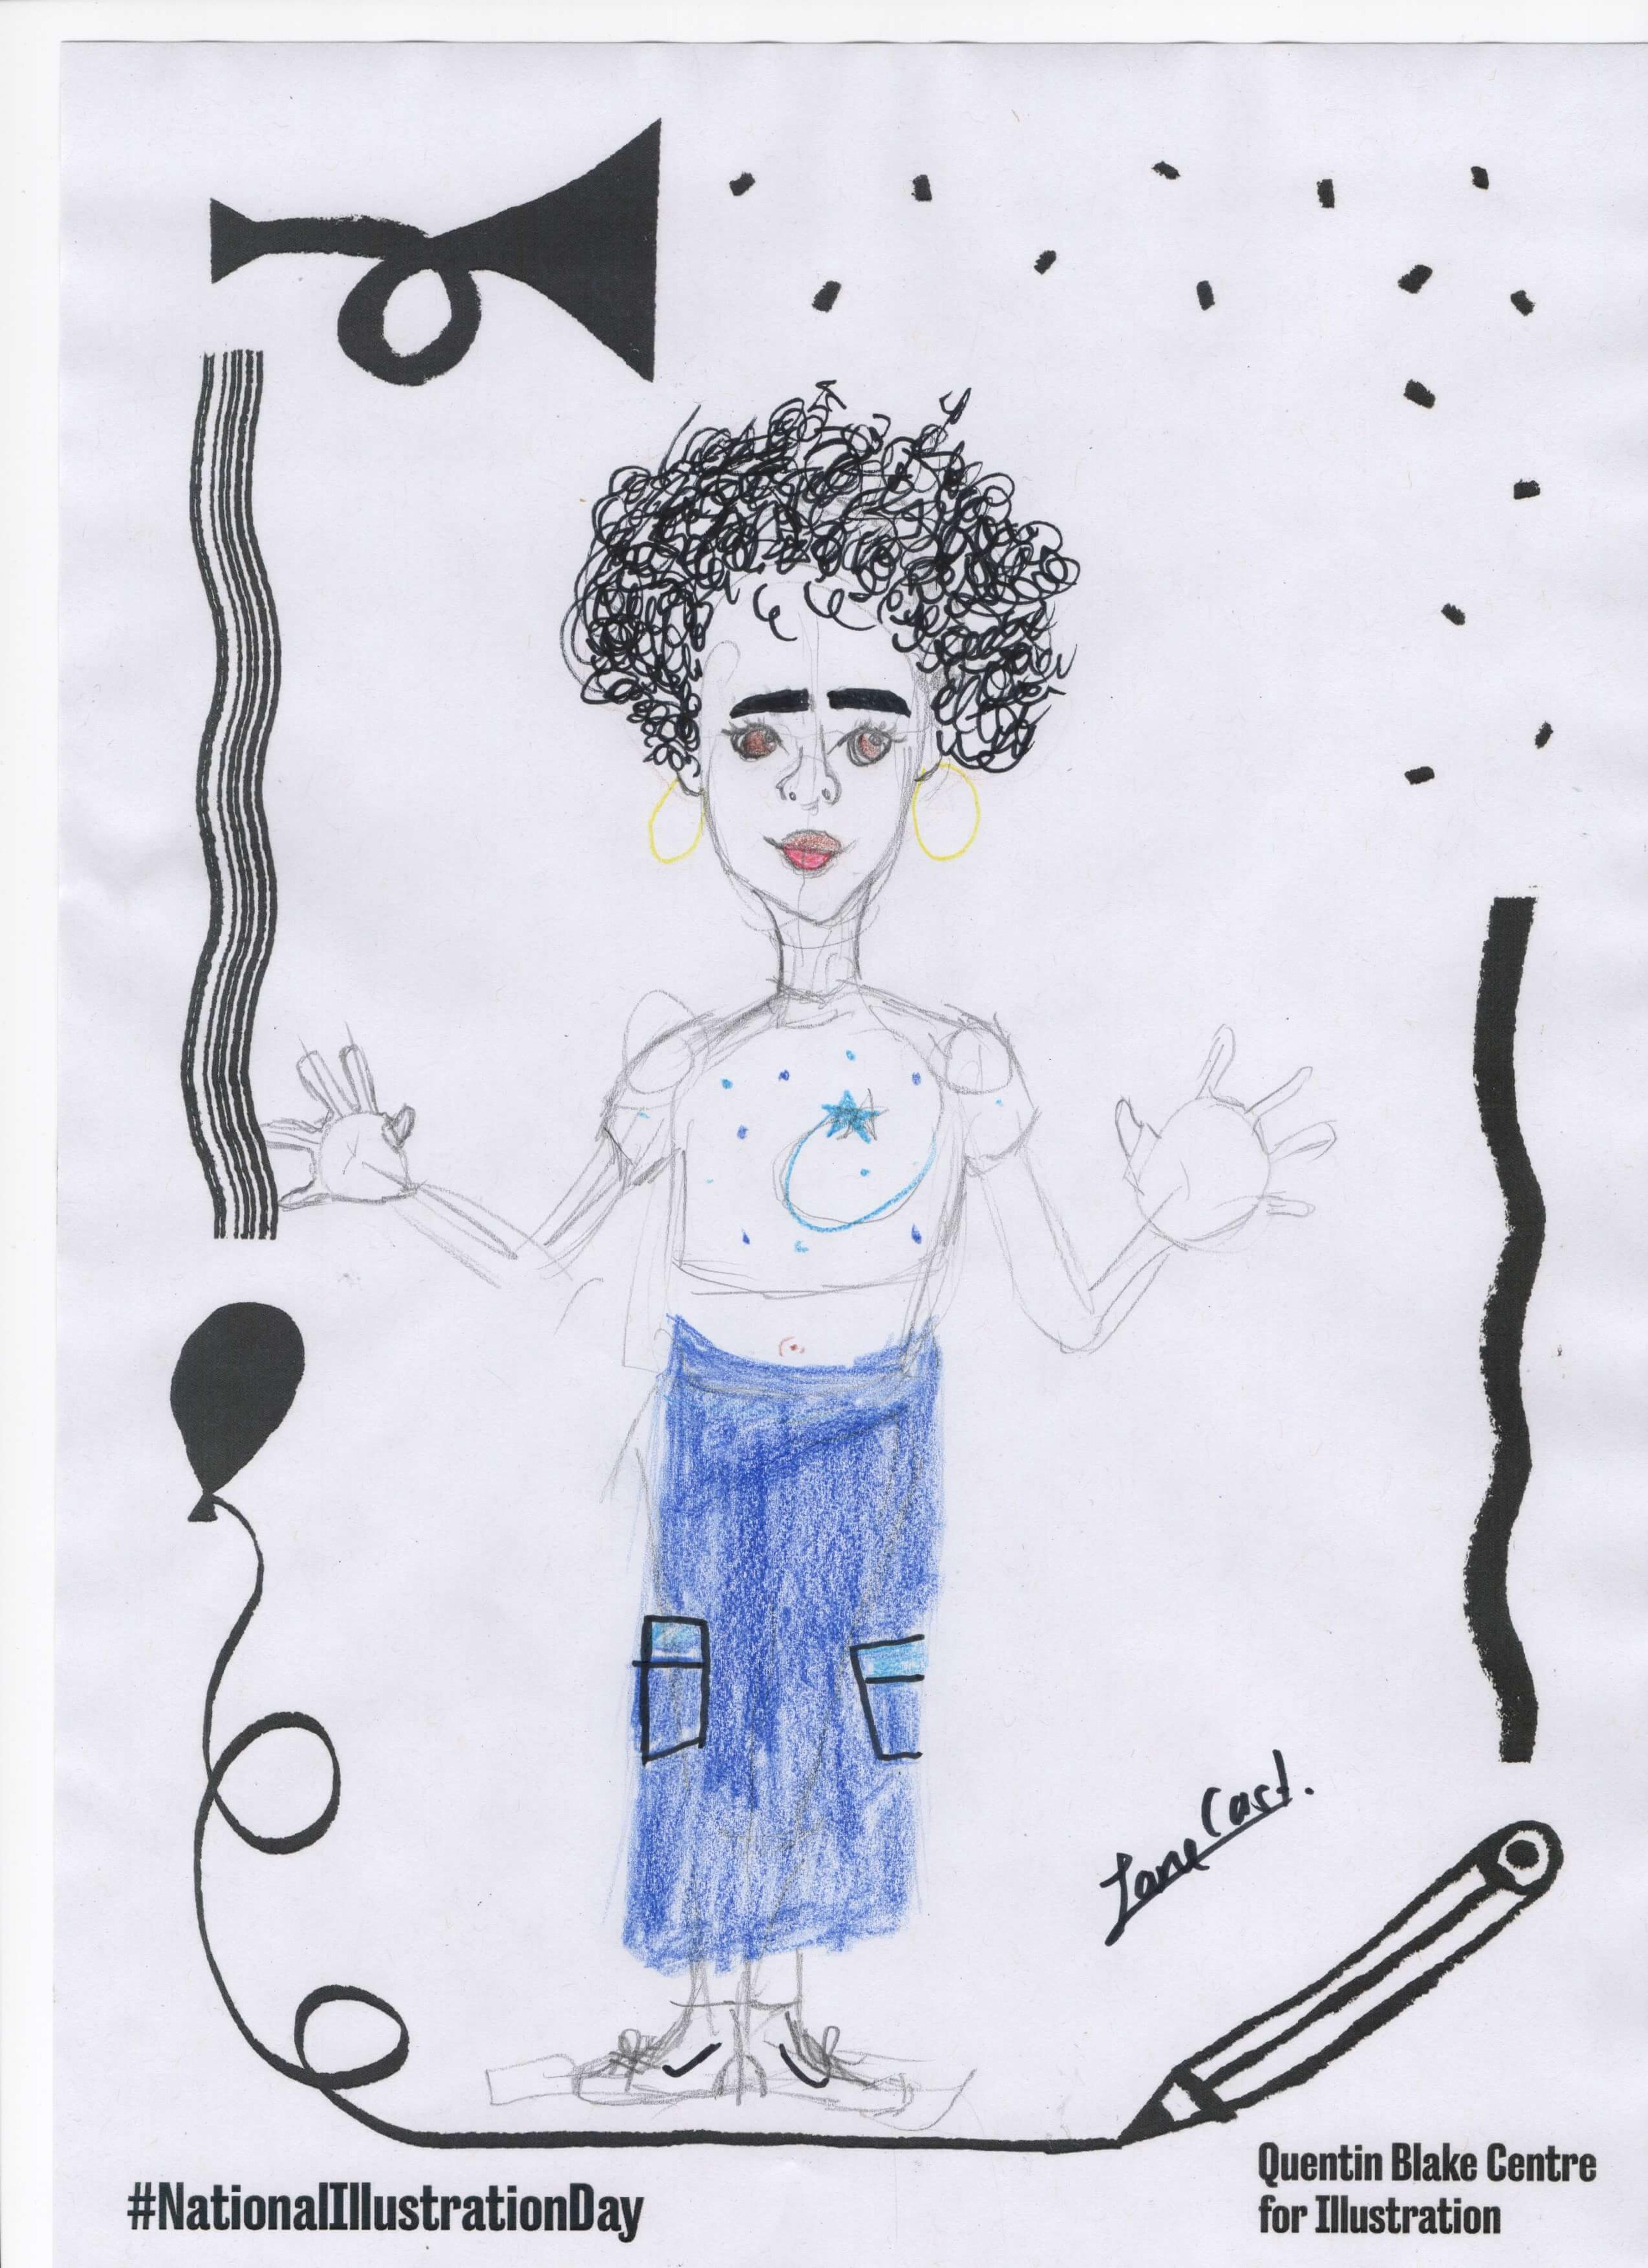 Colour pencil drawing of a person with short coily hair making jazz hands. They are wearing a crop top and a long blue skirt. 